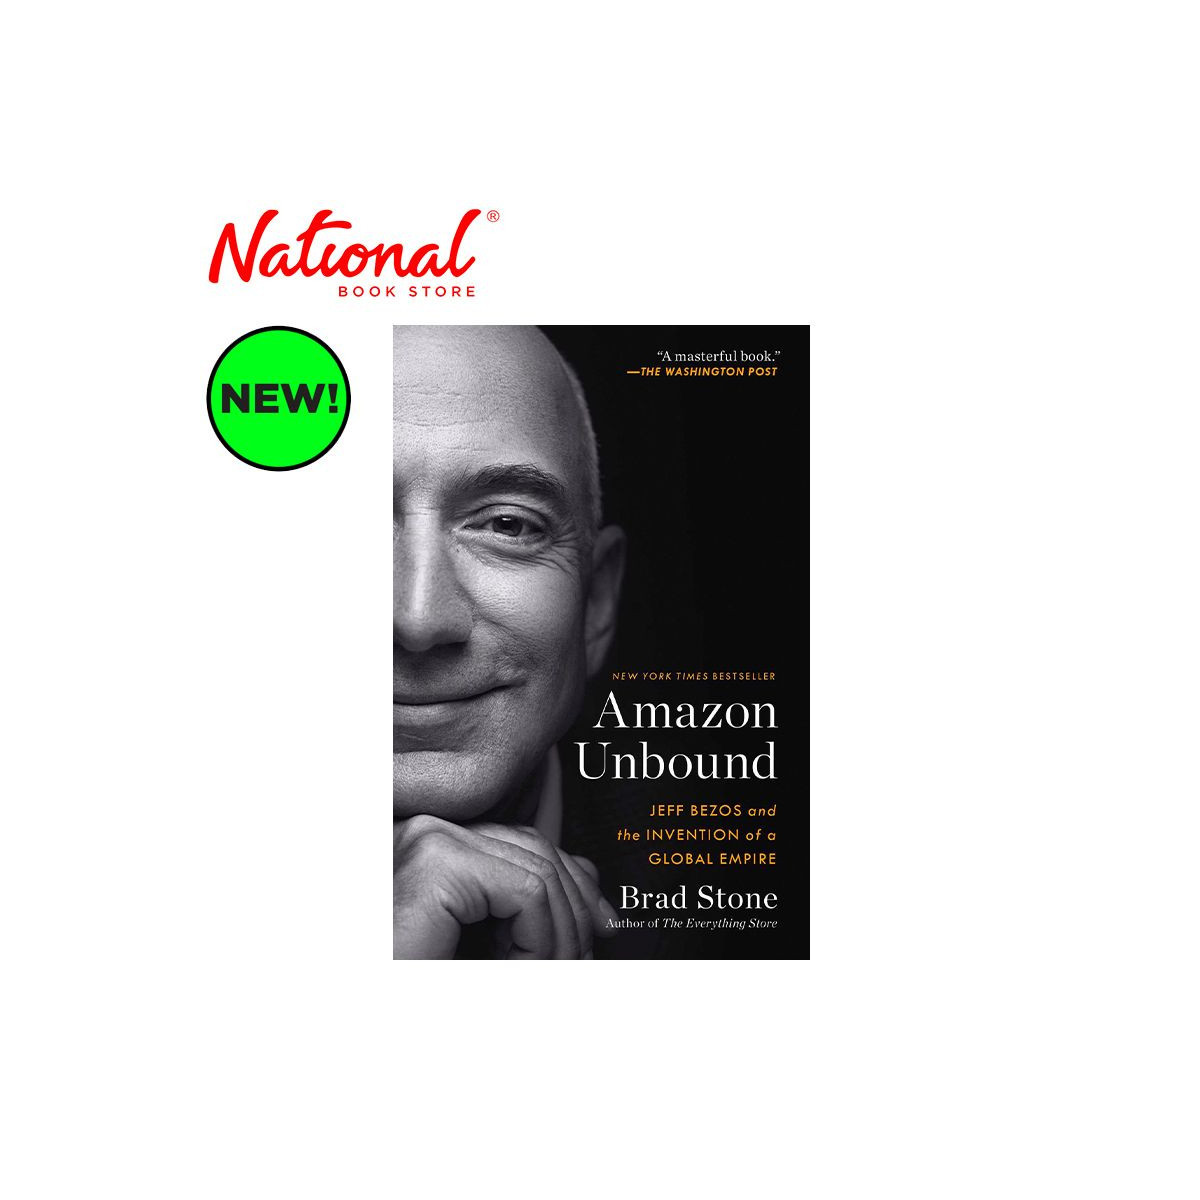 Amazon Unbound by Brad Stone - Trade Paperback - Business Books